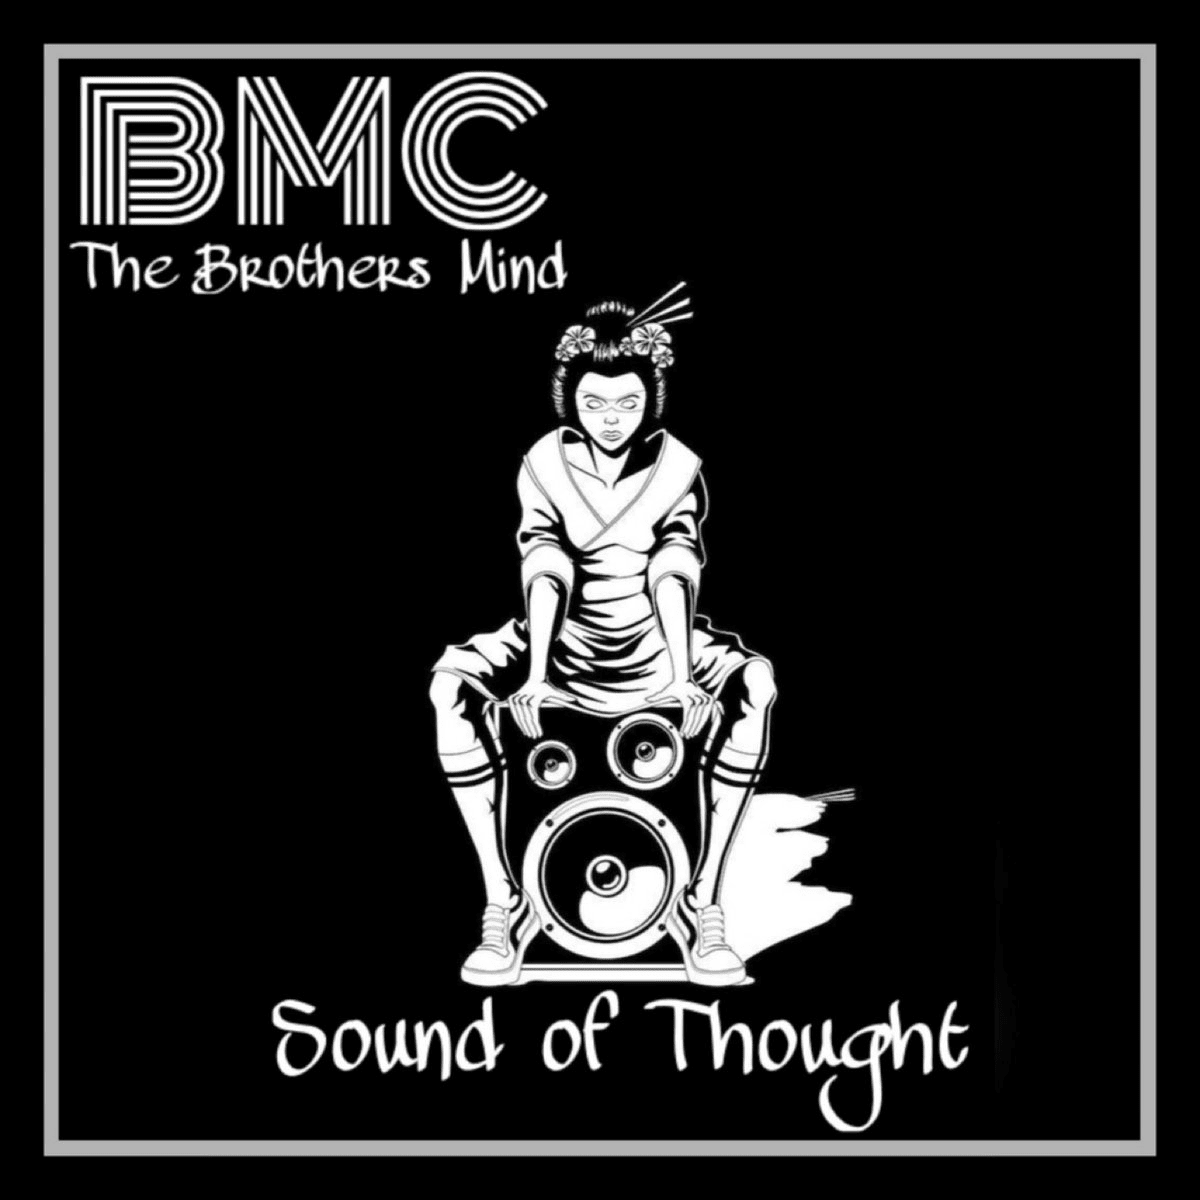 The Brothers Mind (BMC) Drop New Single - "Sound Of Thought"